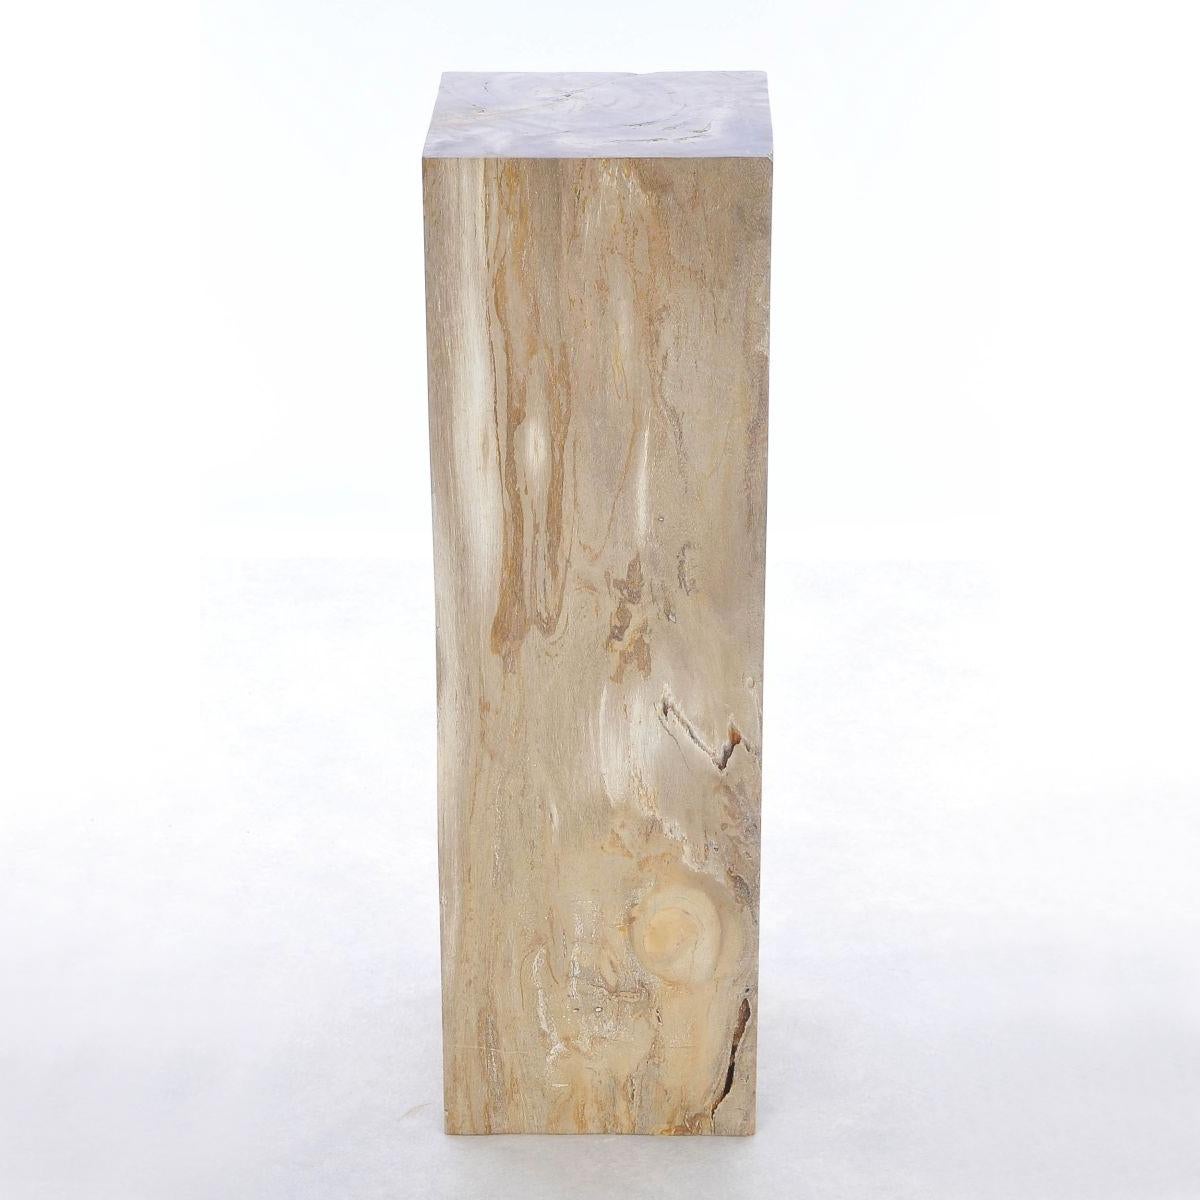 Pedestal Petrified Wood Raw C with all structure 
in carved and polished petrified wood.